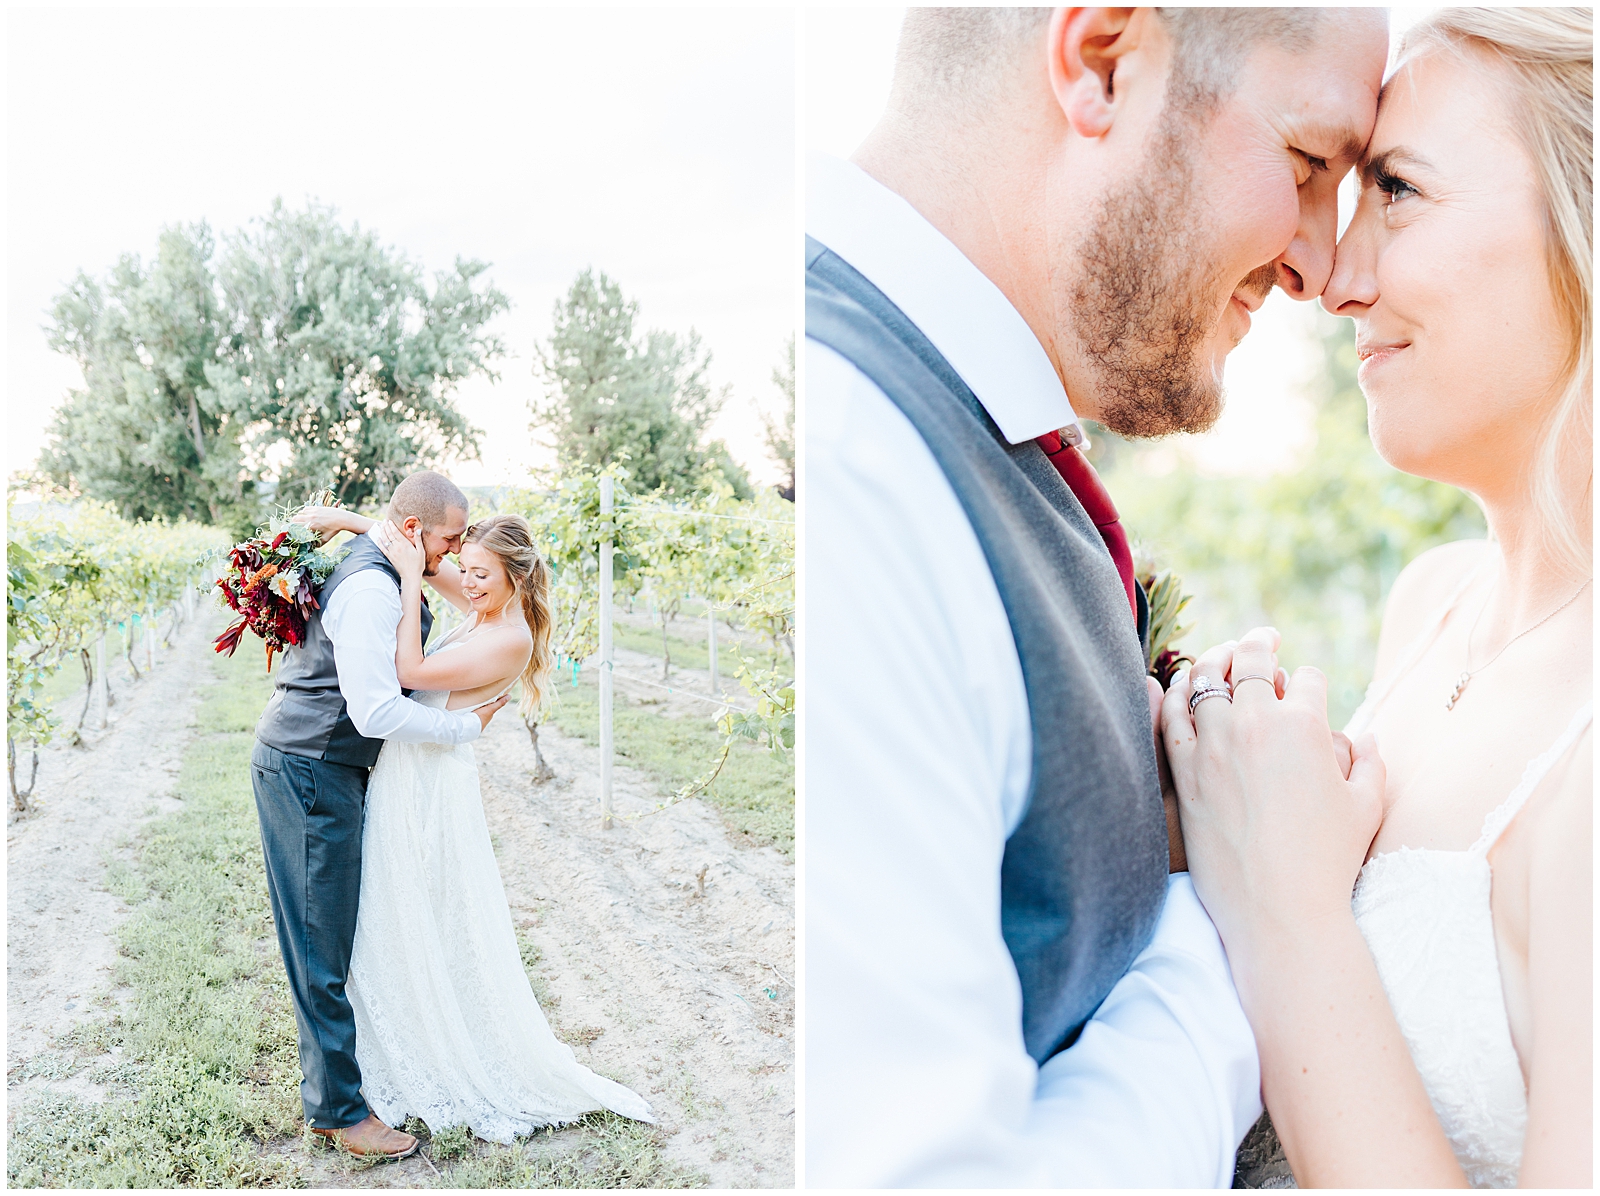 Sweet Giggles Between the Bride and Groom at Fox Canyon Vineyards Wedding